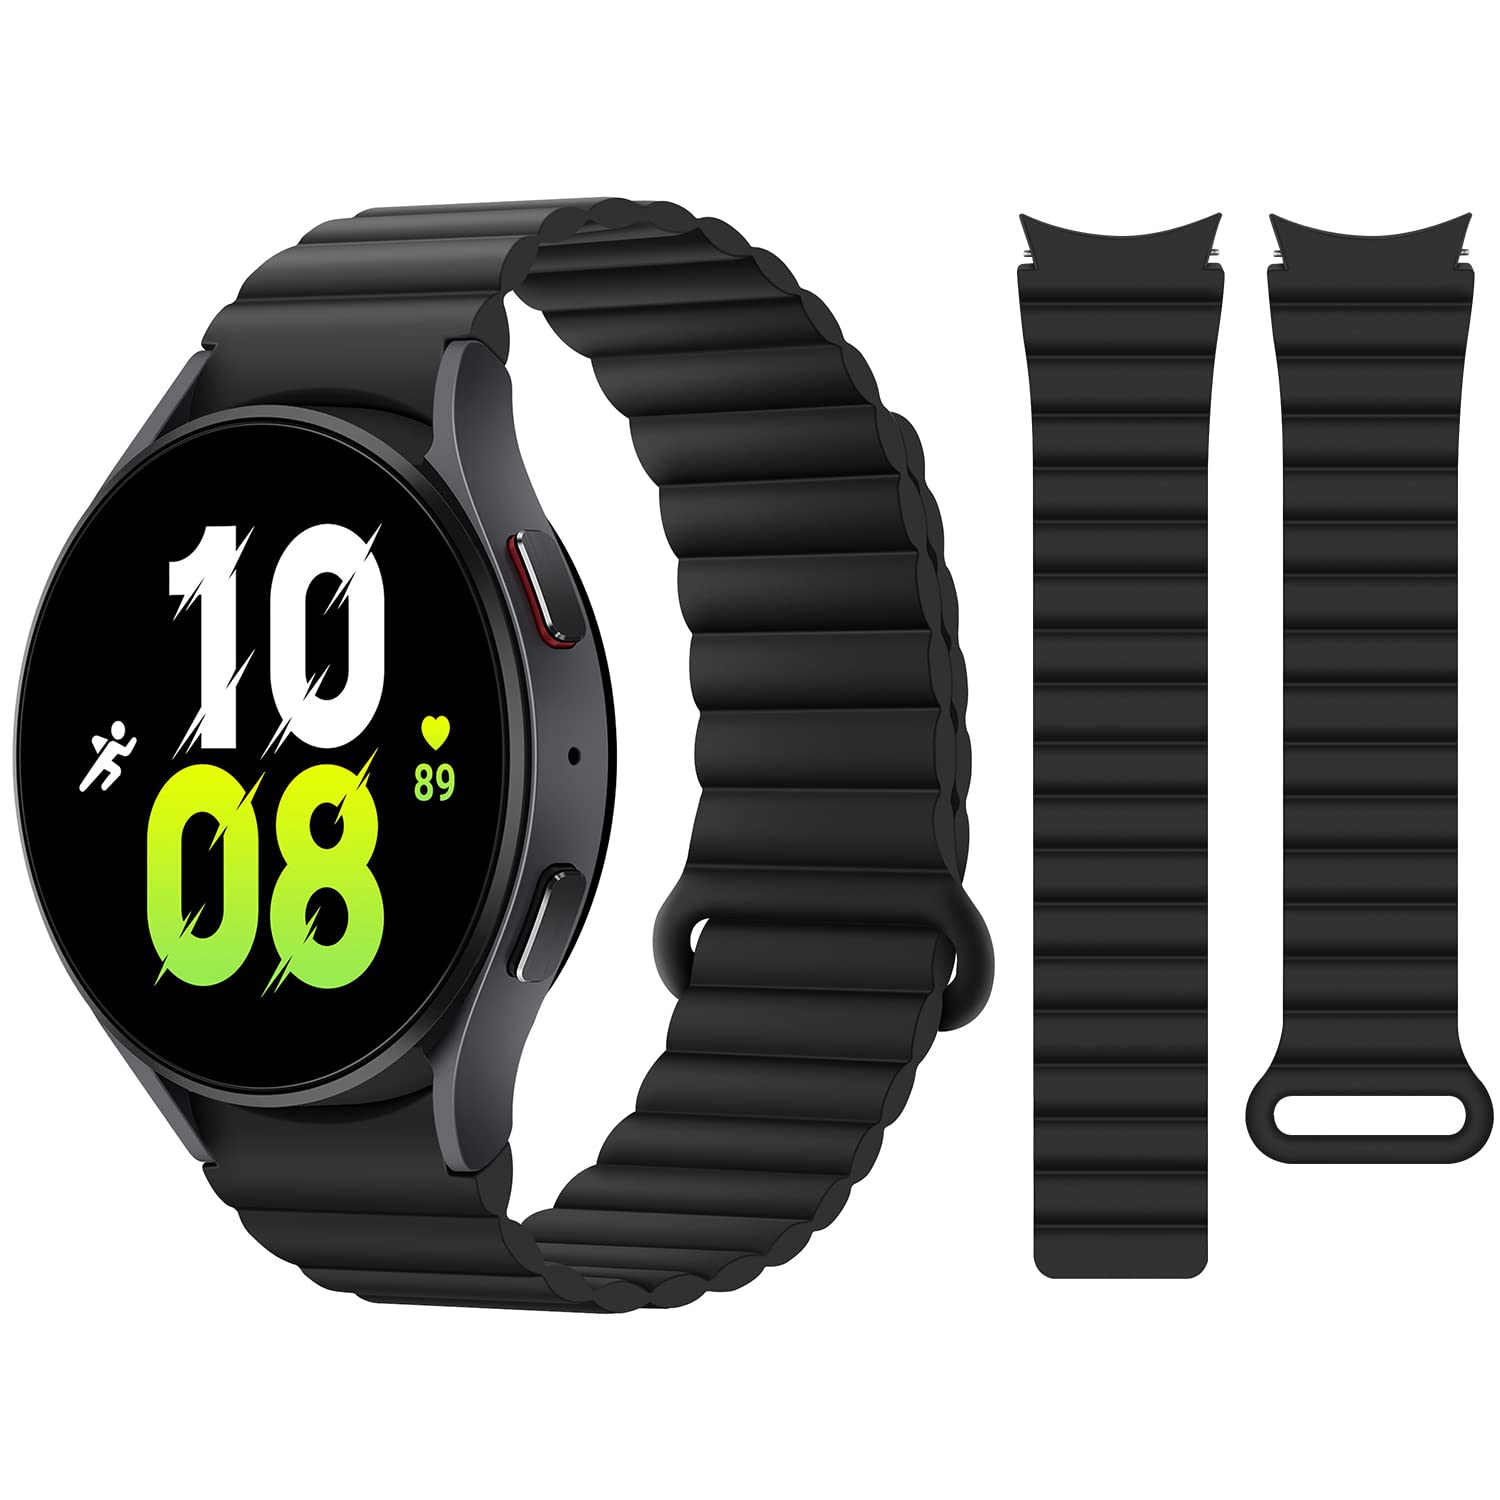 HITZEE Bands Compatible with Samsung Galaxy Watch 4 Band 40mm 44mm Galaxy Watch 5, 20mm Silicone Magnetic Loop Sport Strap Bracelet for Galaxy Watch 4 Classic/Watch 5 Pro, Black